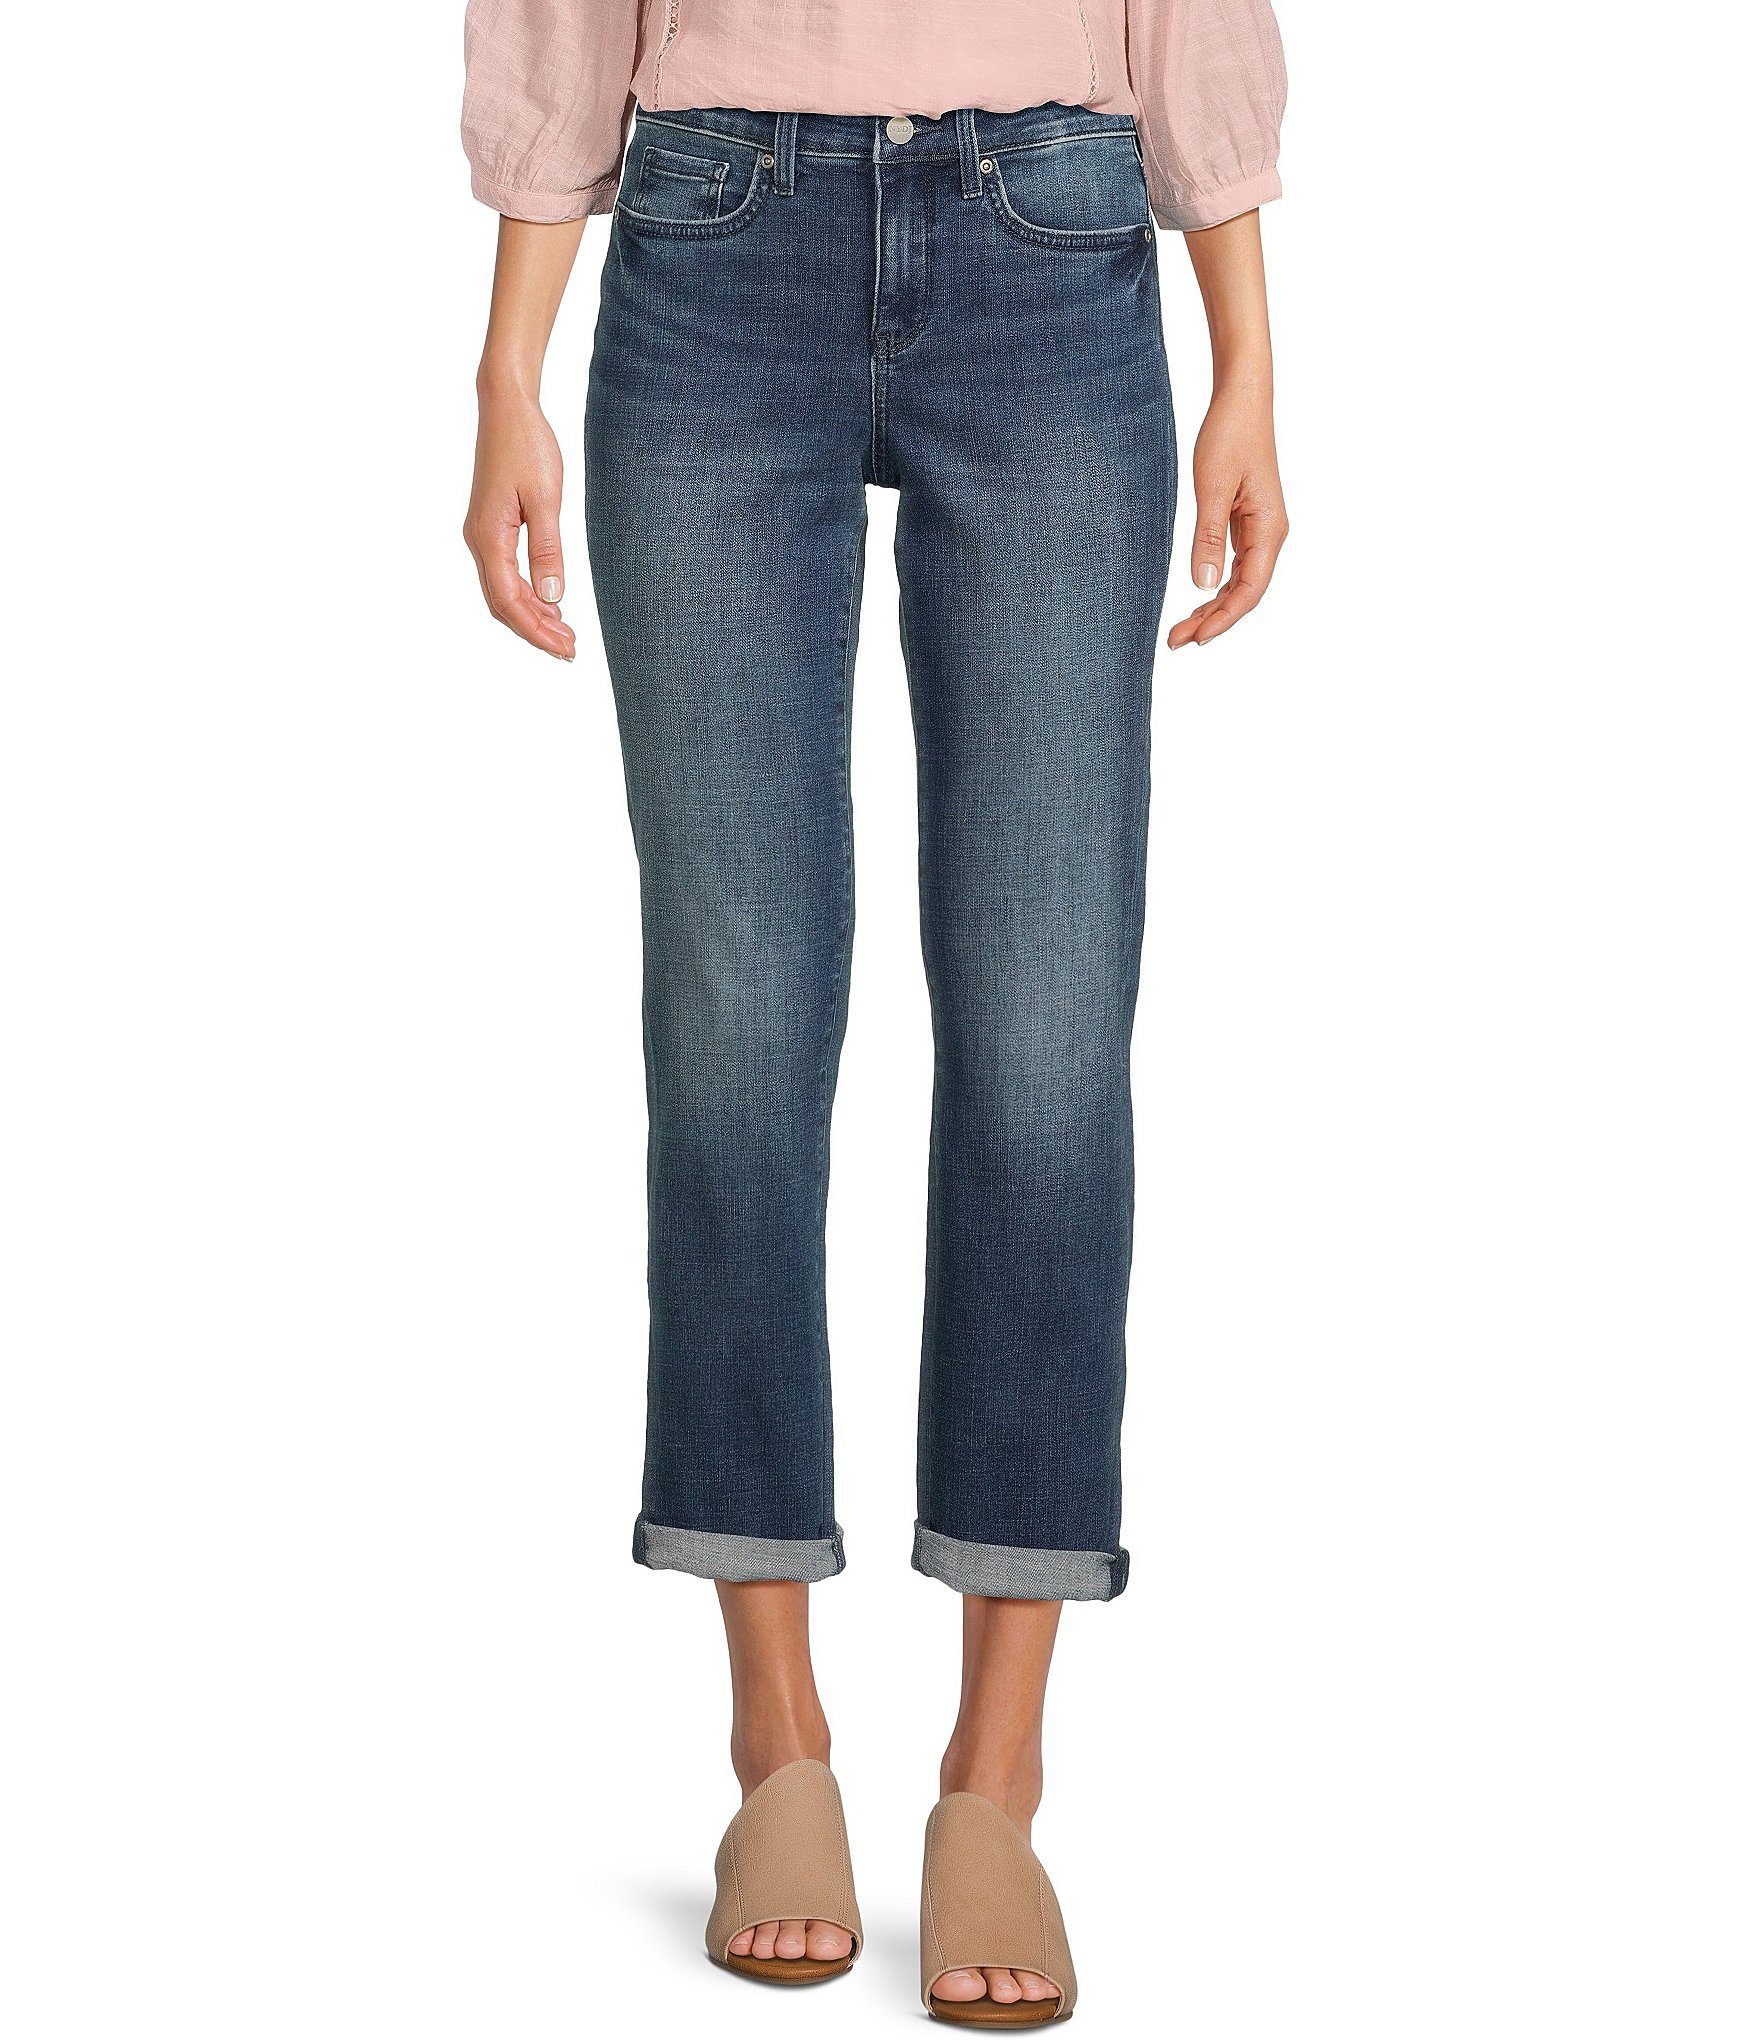 Le Silhouette Slim Bootcut Jeans In Long Inseam With High Rise - Marvelous  Blue | NYDJ